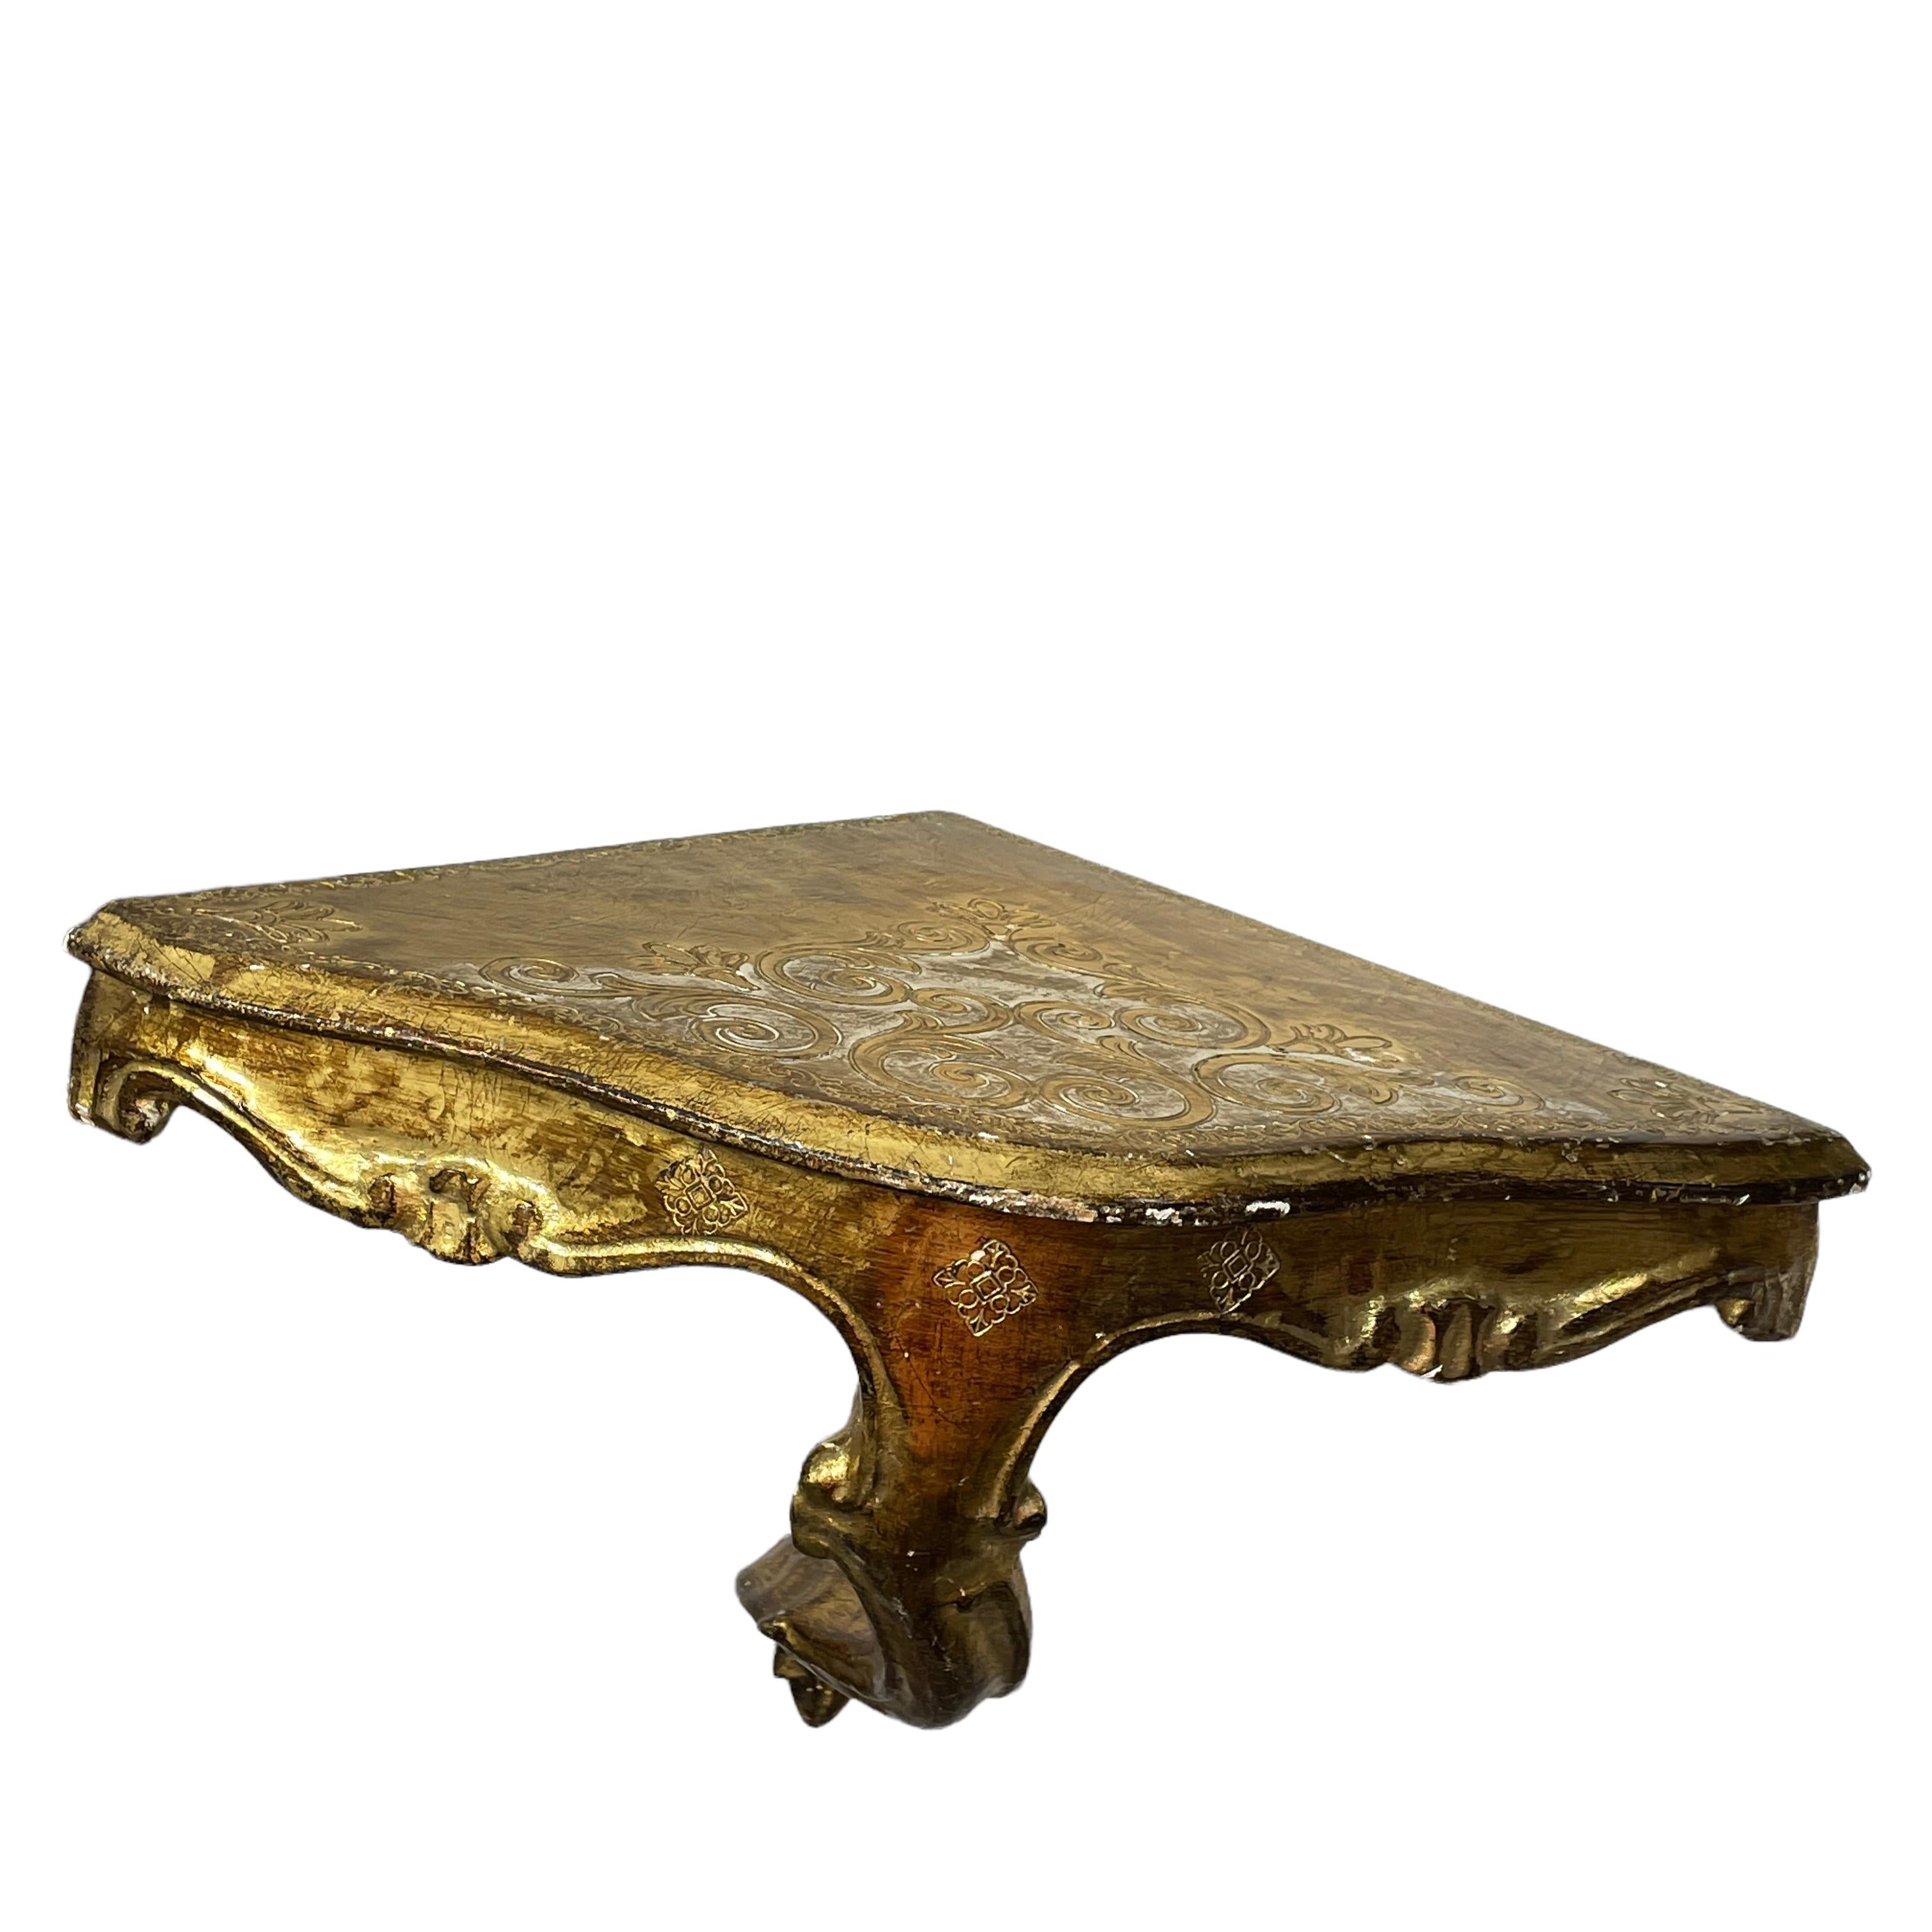 Vintage Florence Wall Corner Shelf Console, Gilded Carved Wood, Florentine Style For Sale 5